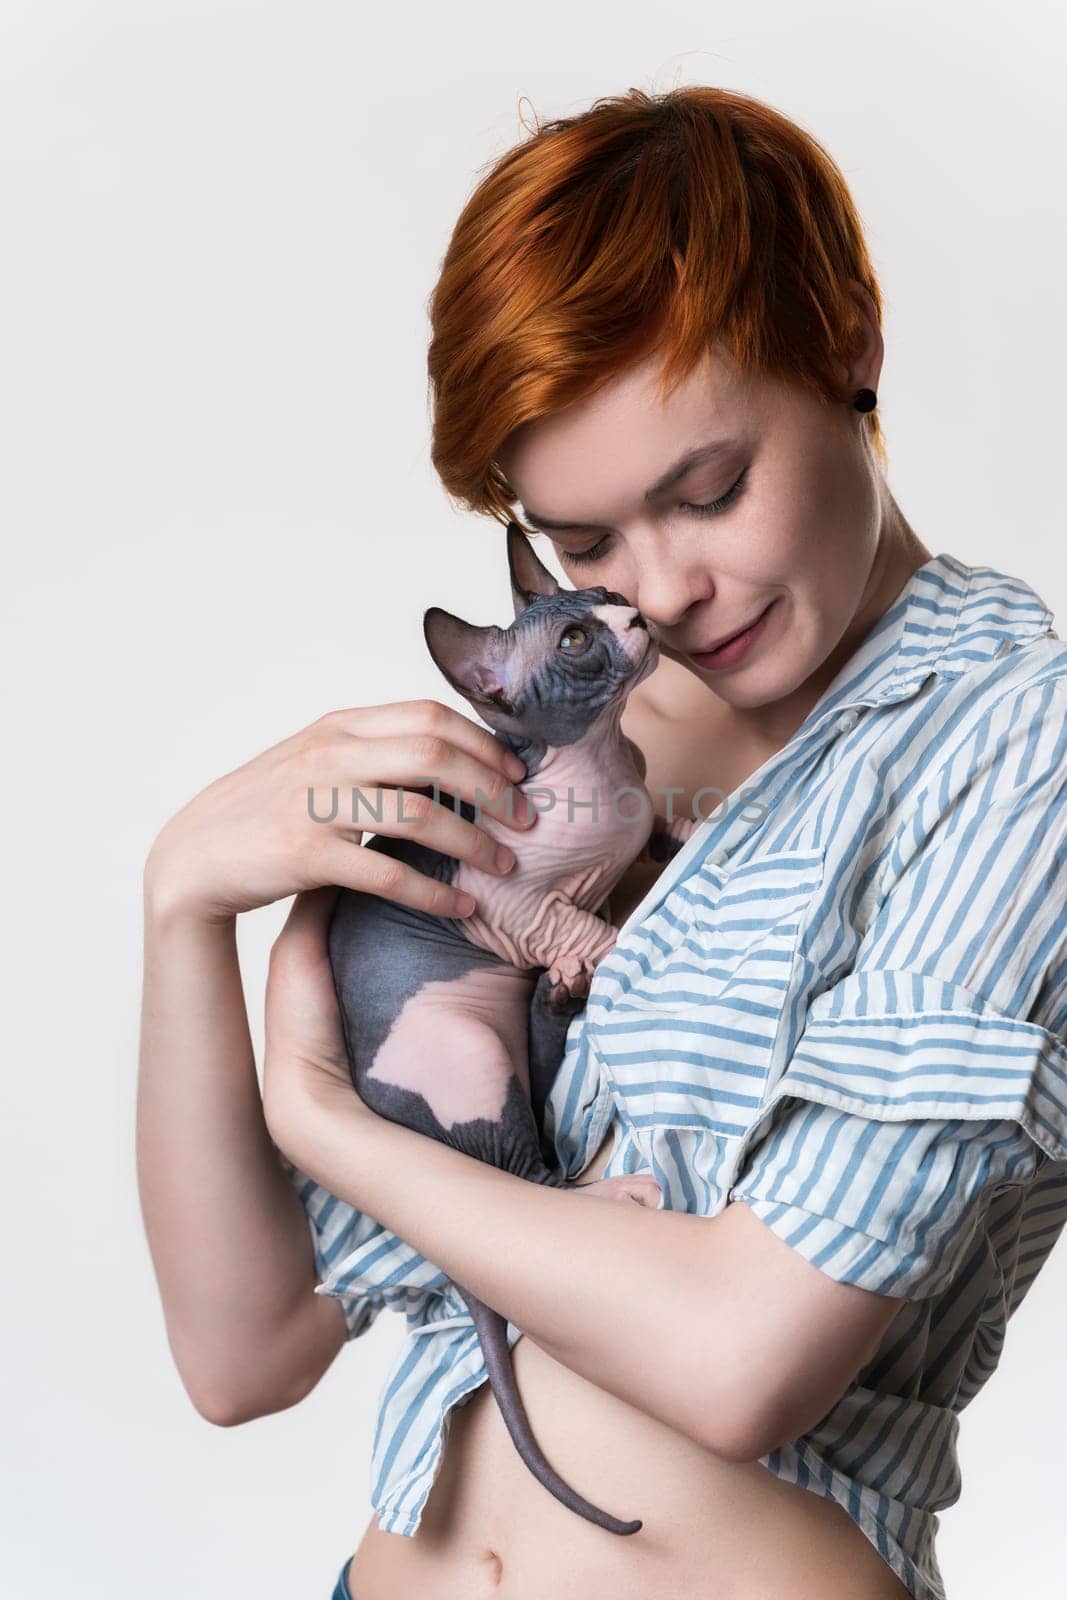 Redhead young woman with closed eyes gently hugs cat looking at owner. Studio shot on white background. Portrait beautiful hipster with short hair dressed in striped white-blue shirt. Part of series.